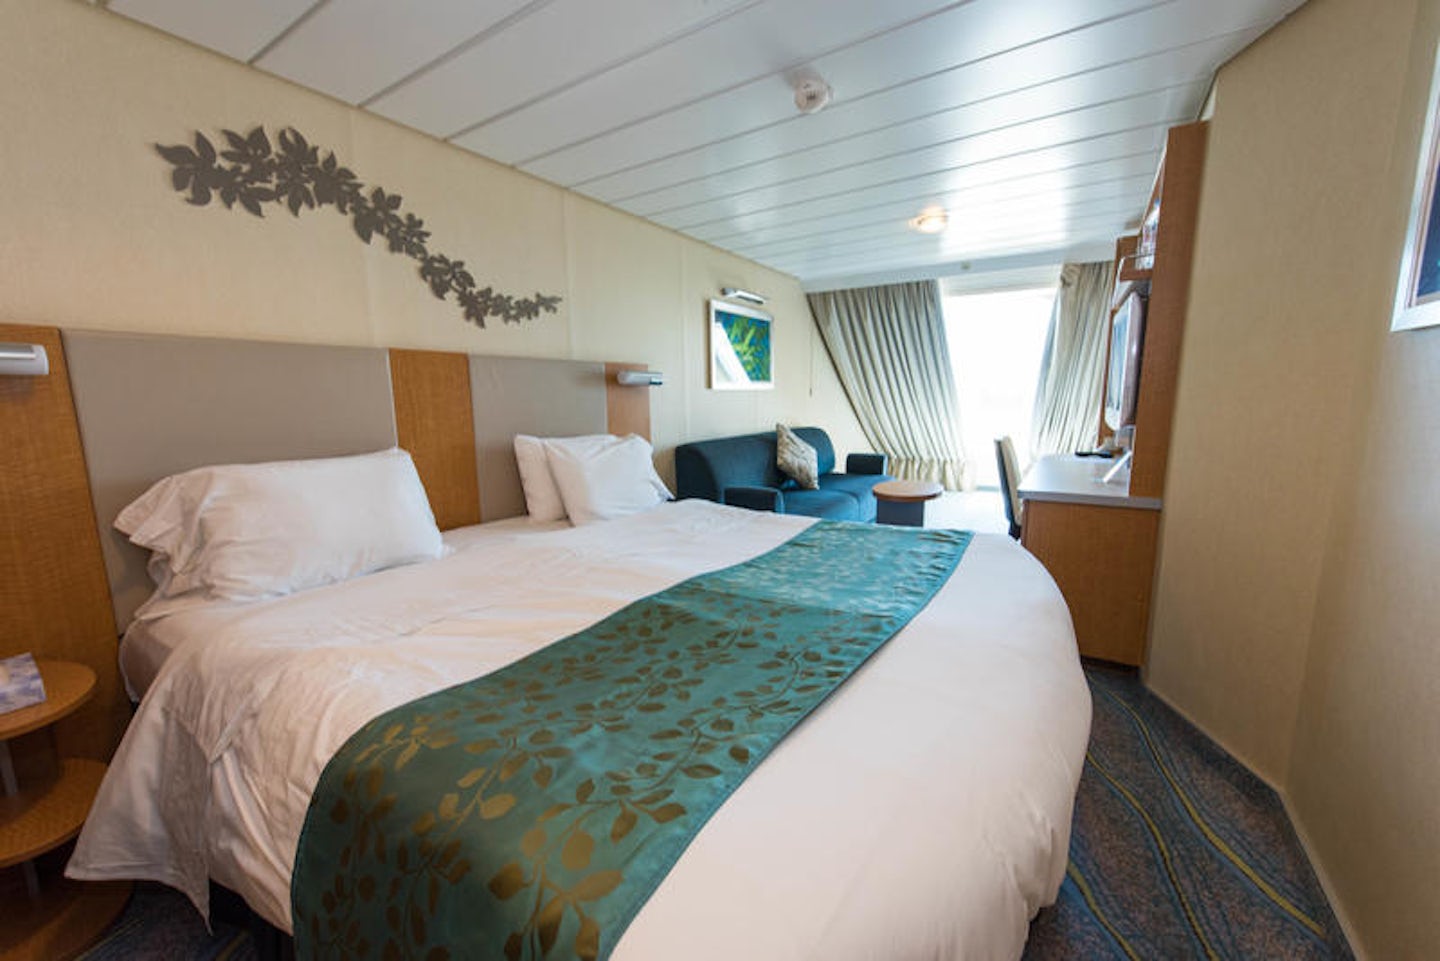 The Family Oceanview Cabin on Oasis of the Seas